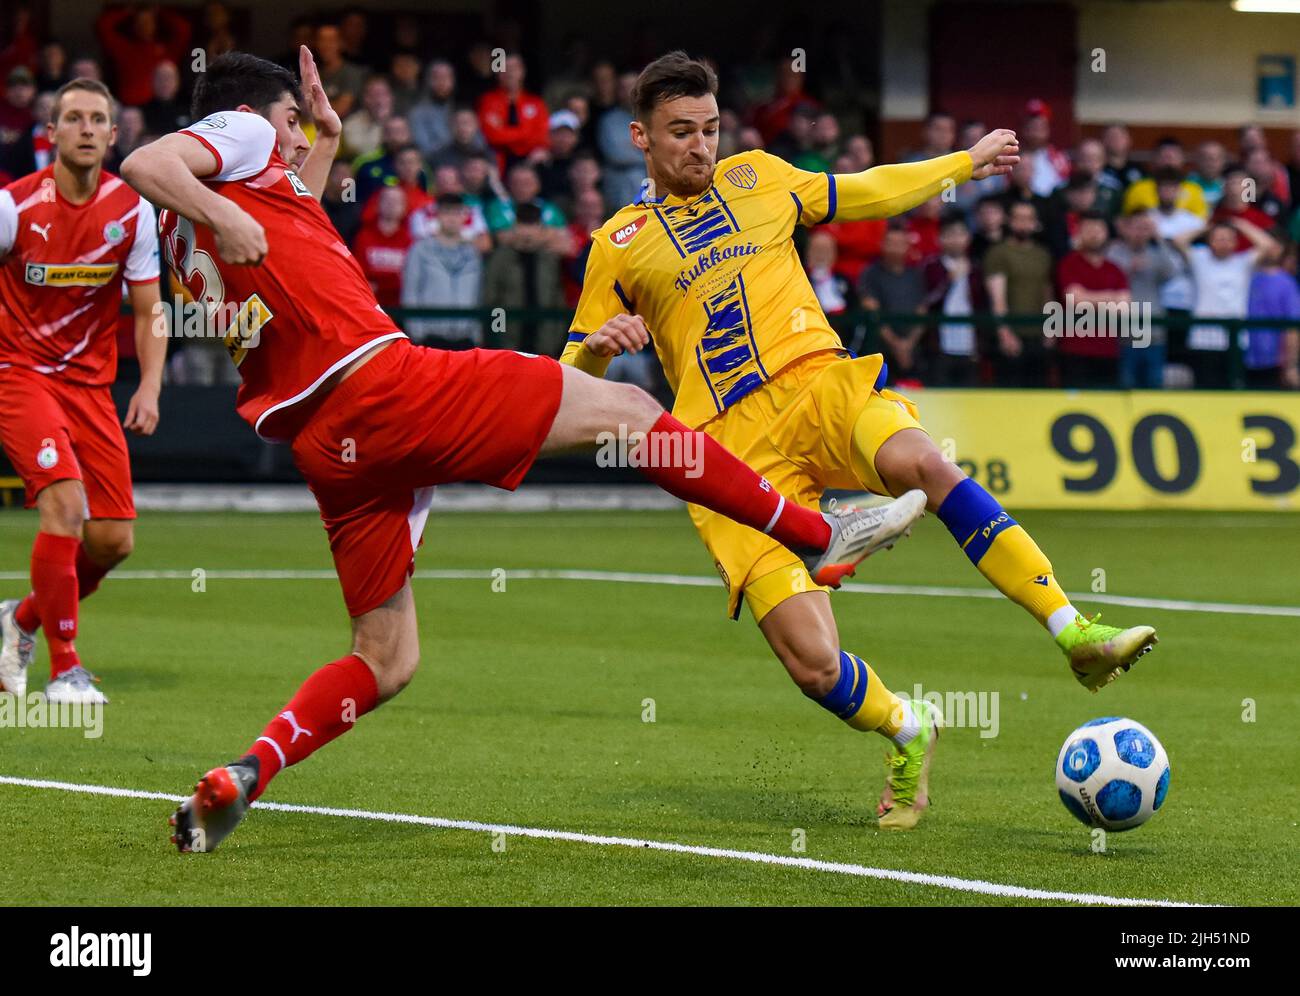 Kris Lowe in action - Cliftonville Vs DAC 1904 - UEFA Europa Conference League Stock Photo